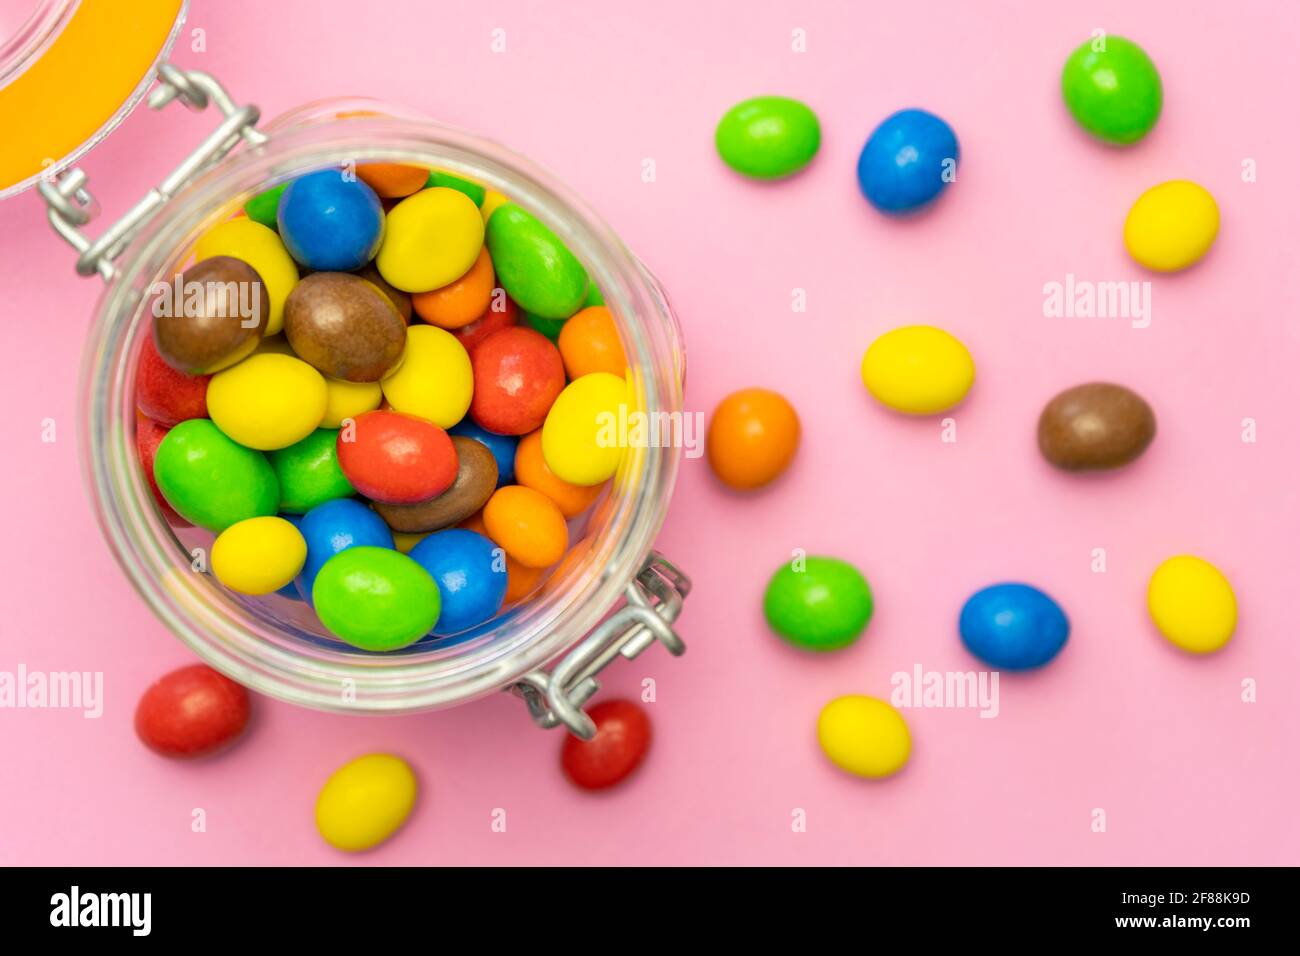 Multicolored chocolate candies in glass jar on pink background.Top view colorful sweets background concept. Stock Photo